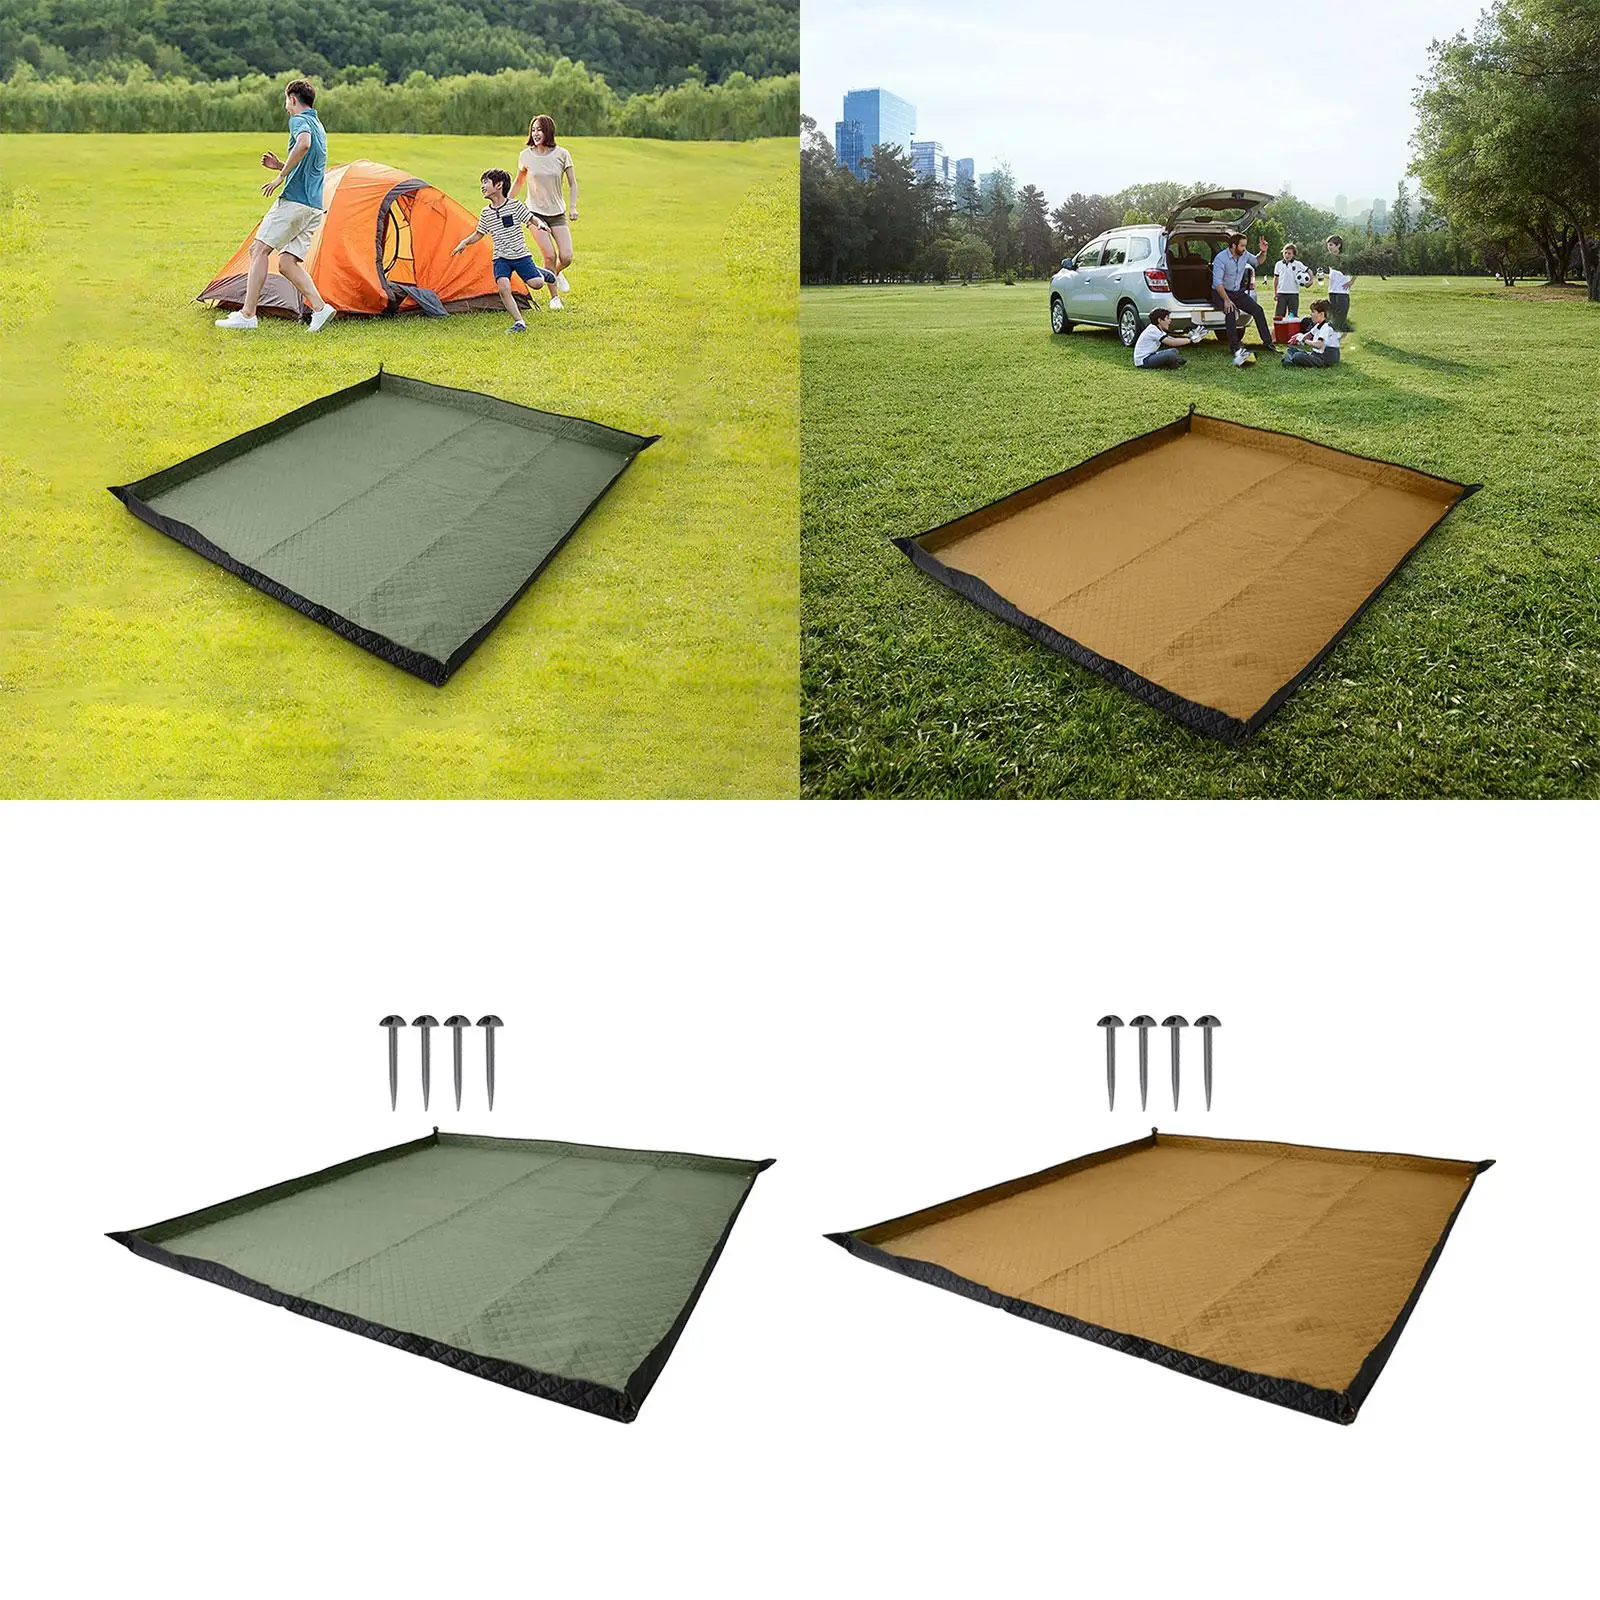 Sleeping Pad with Carry Strap Portable Foldable Rug Grass Park Blanket Camping Blanket for Party Hiking Camping Outdoor Concerts